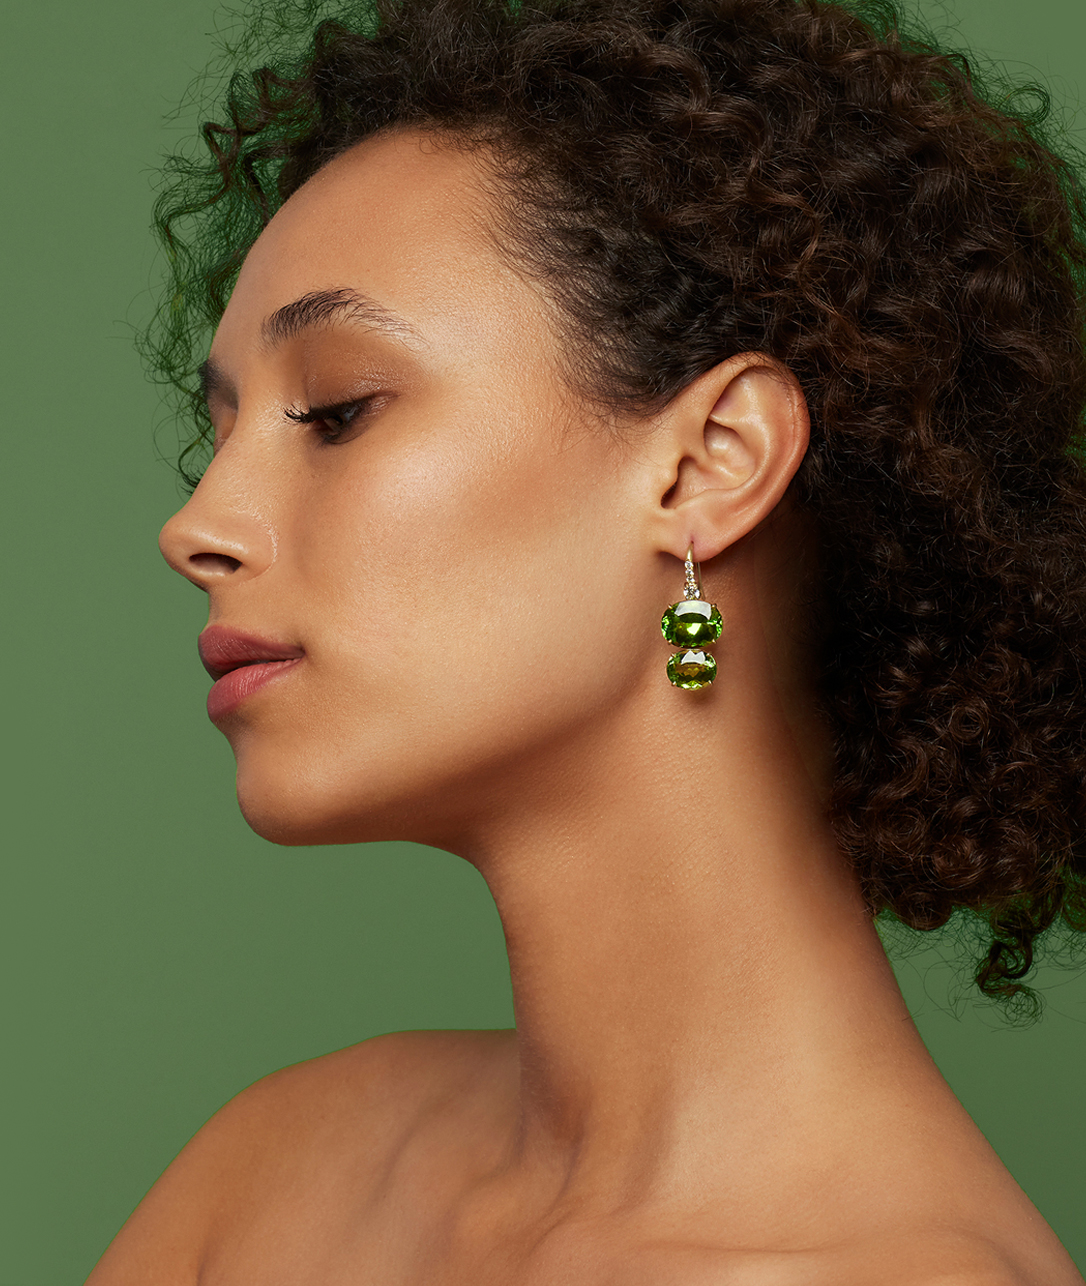 Dress Code: Cocktail
A pair of gorgeous Double Drop Earrings spins classic style for a fresh look that will stand the test of time.SHOP DOUBLE DROP EARRINGS